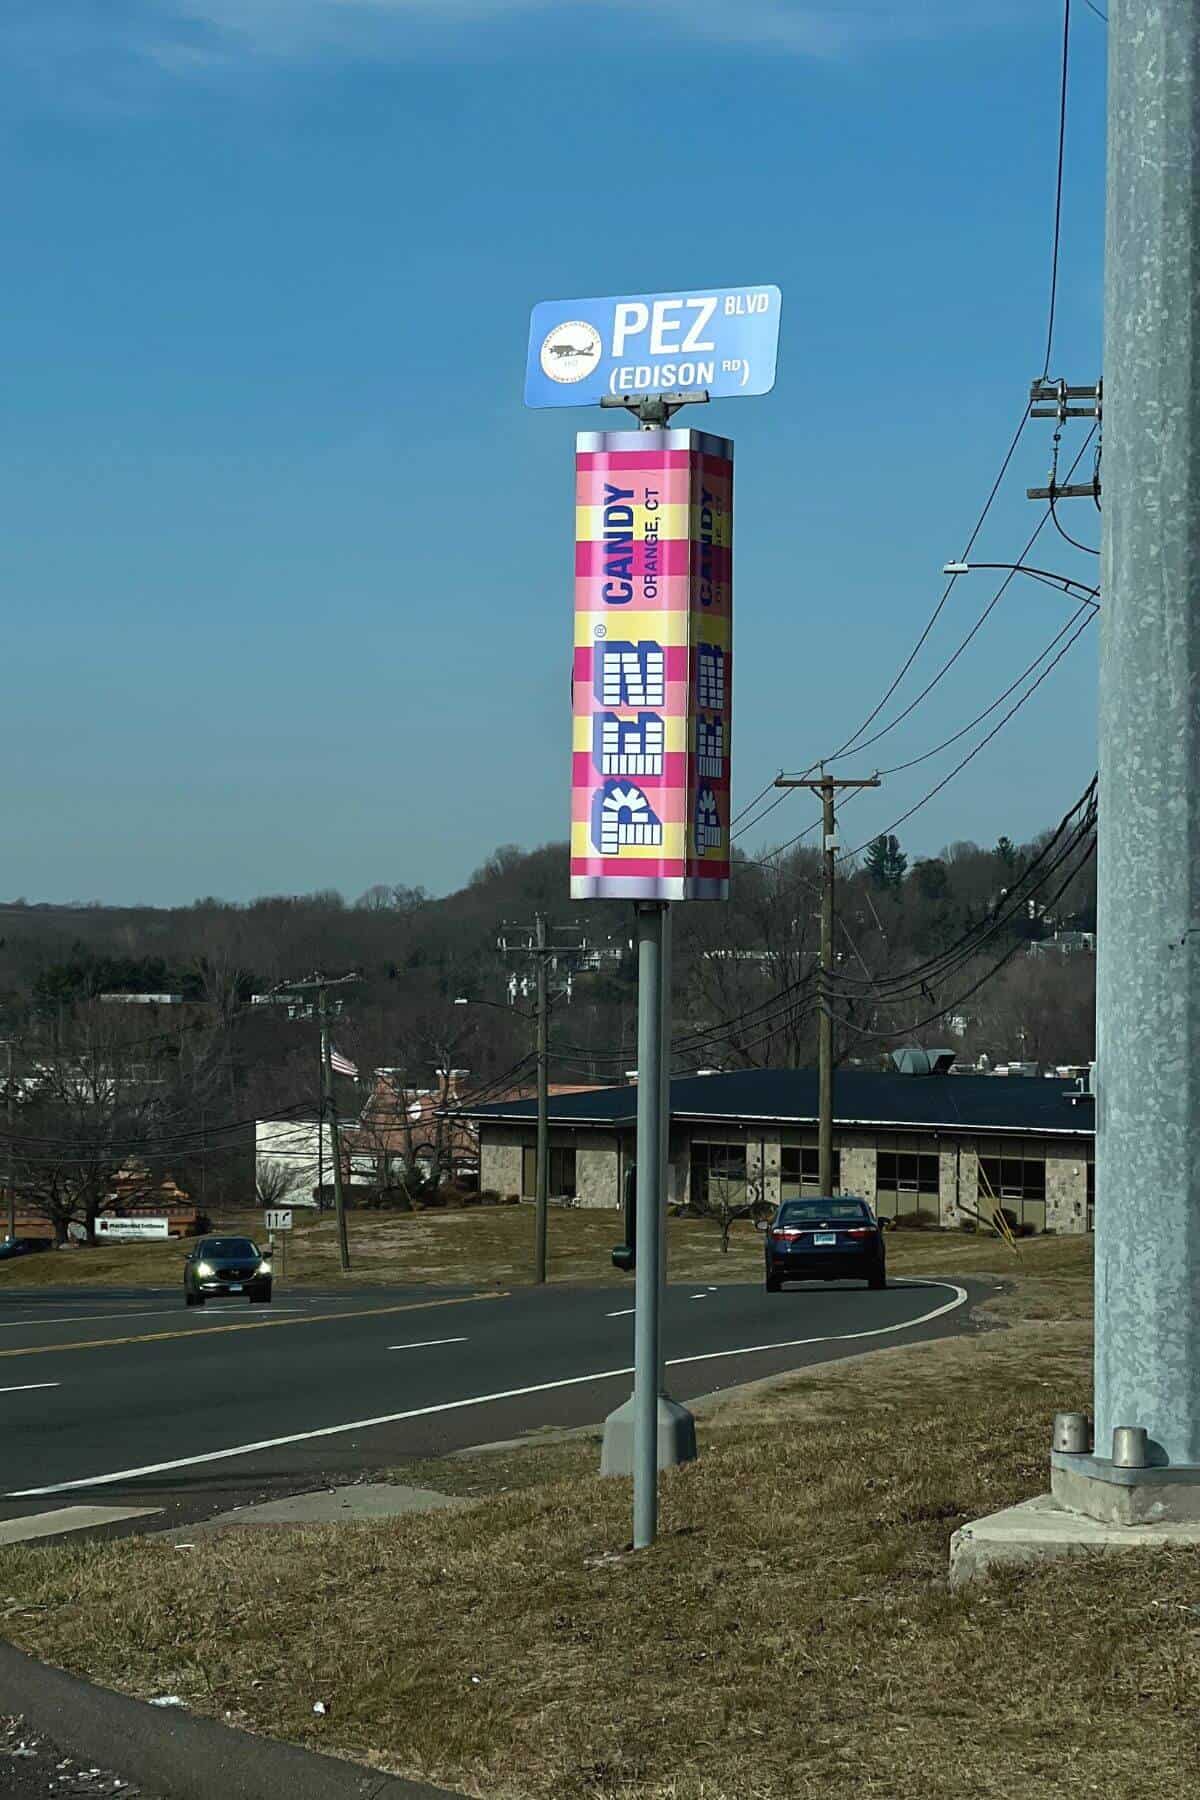 PEZ candy street sign.